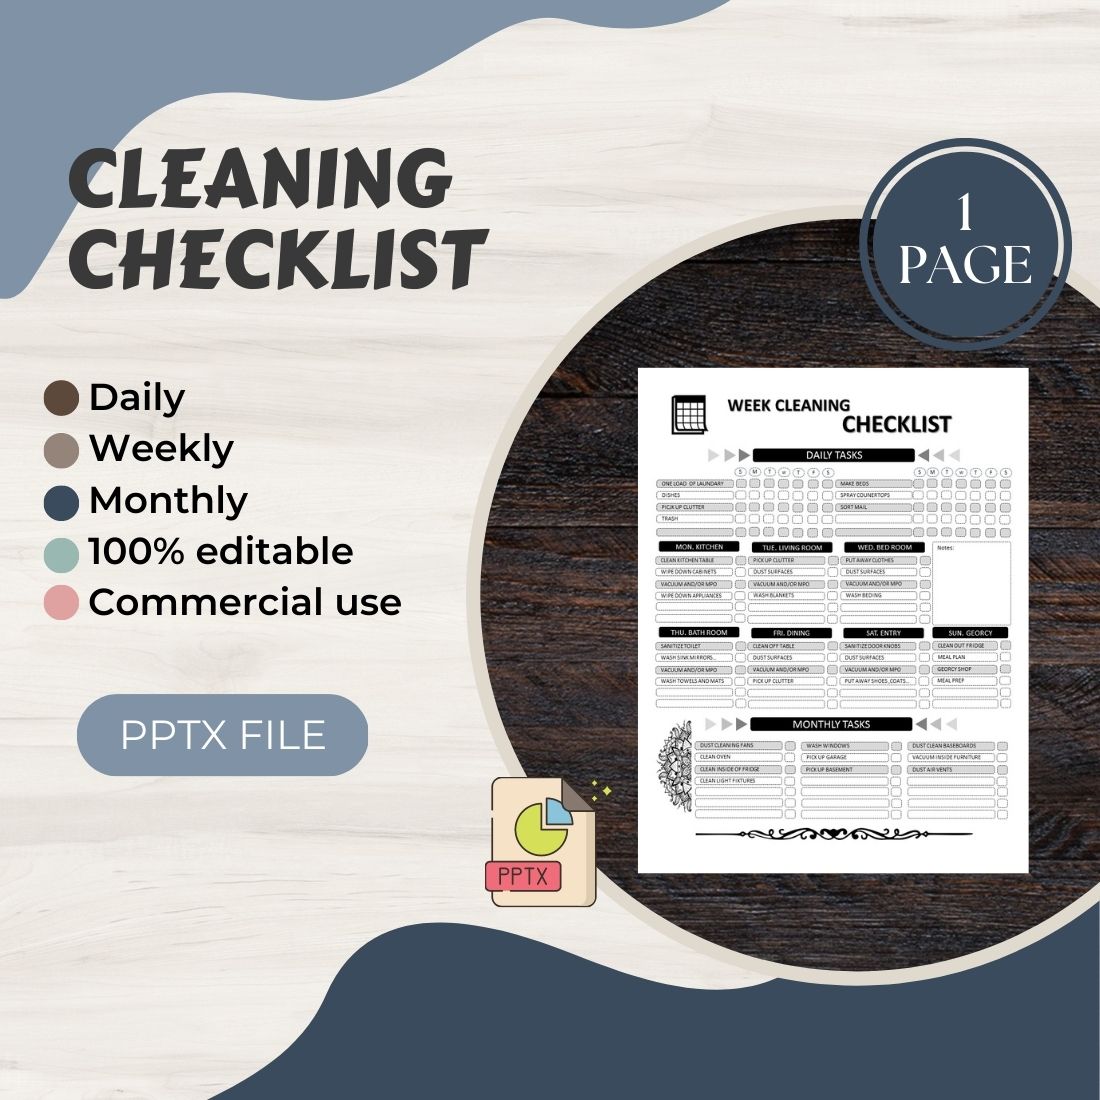 Cleaning checklist schedule log book totally editable for commercial use pinterest preview image.